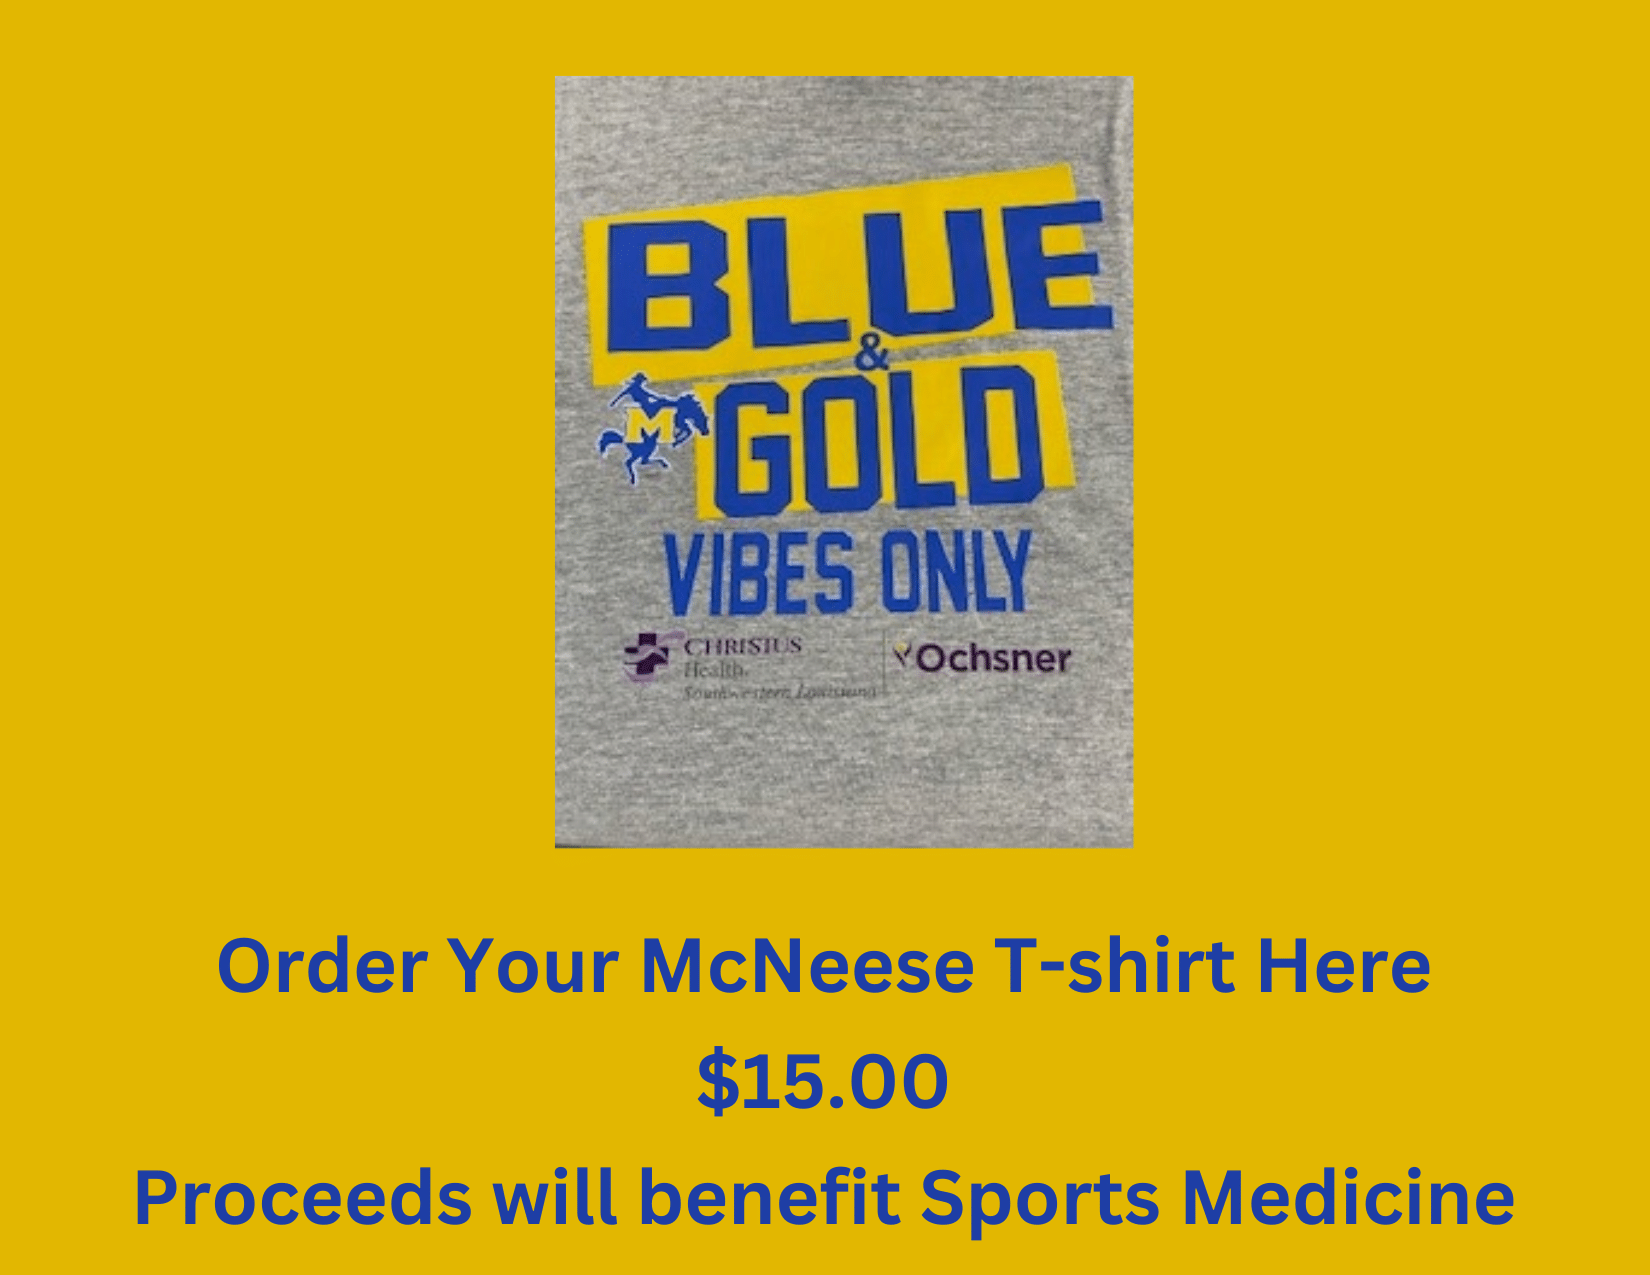 Blue and gold Vibes only McNeese